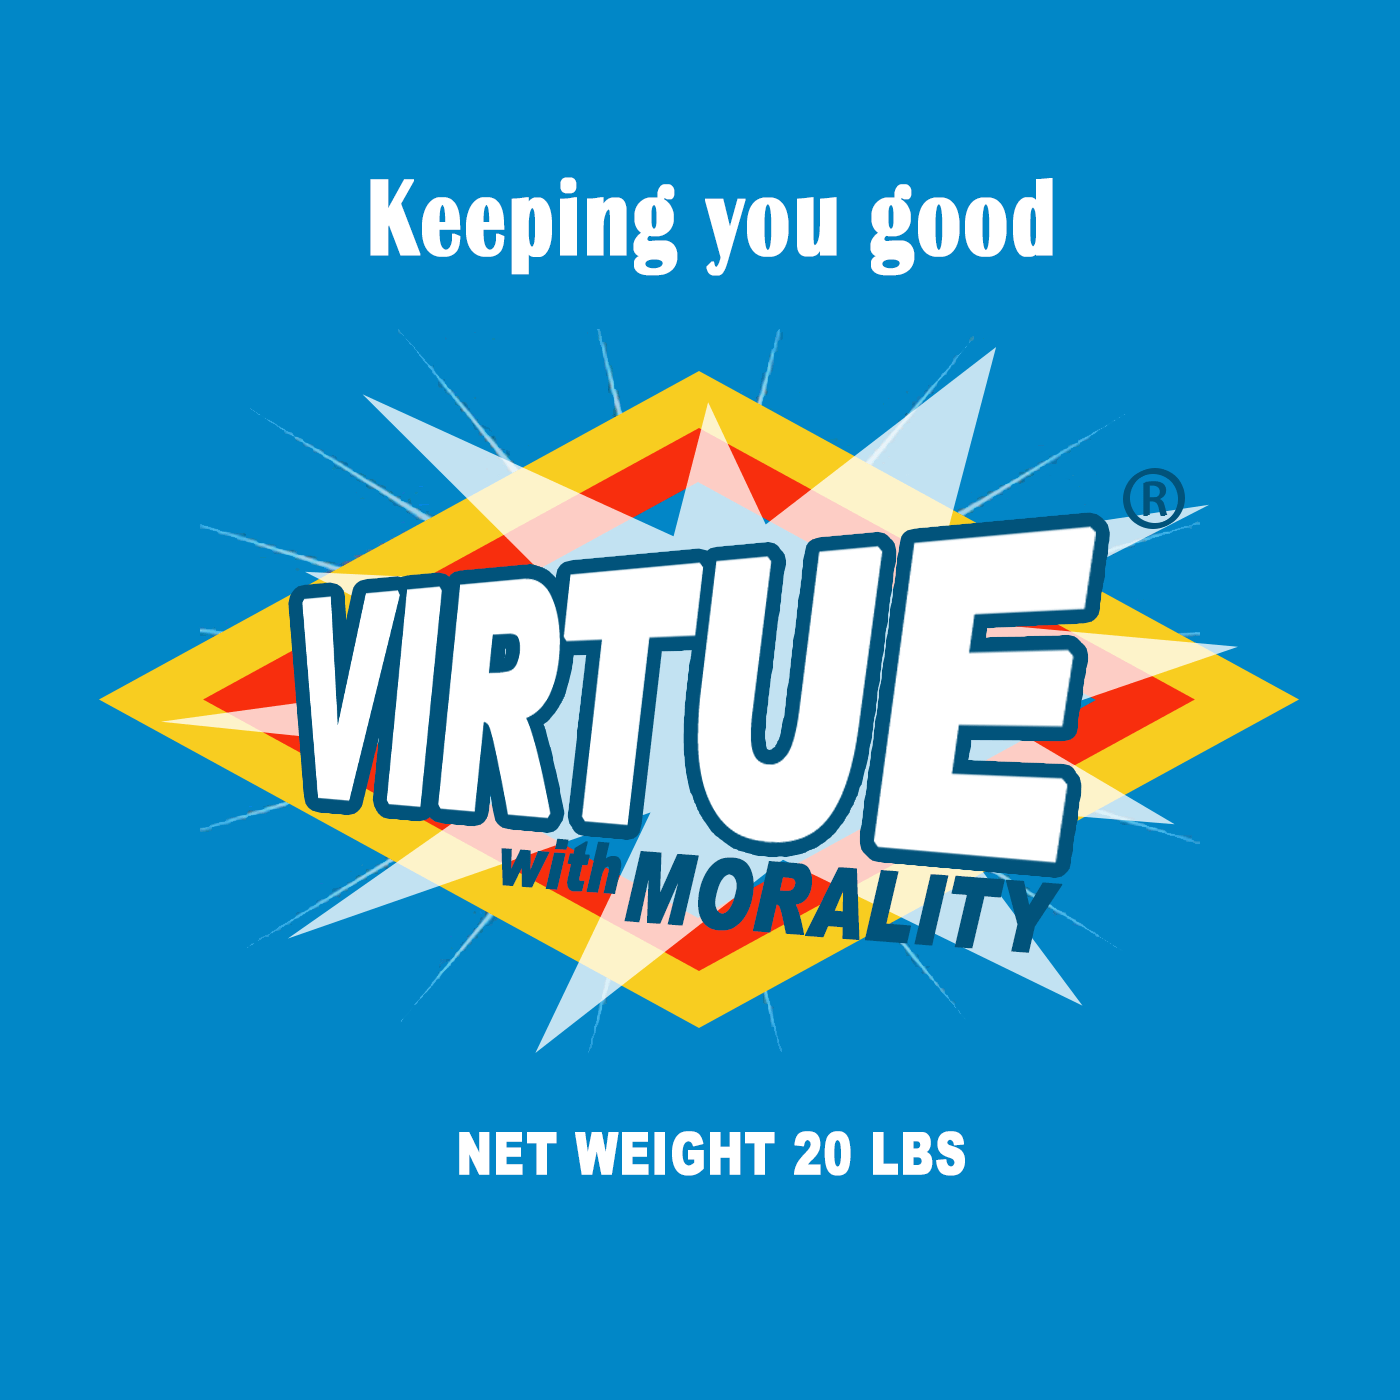 What is virtue and how do we encourage it?